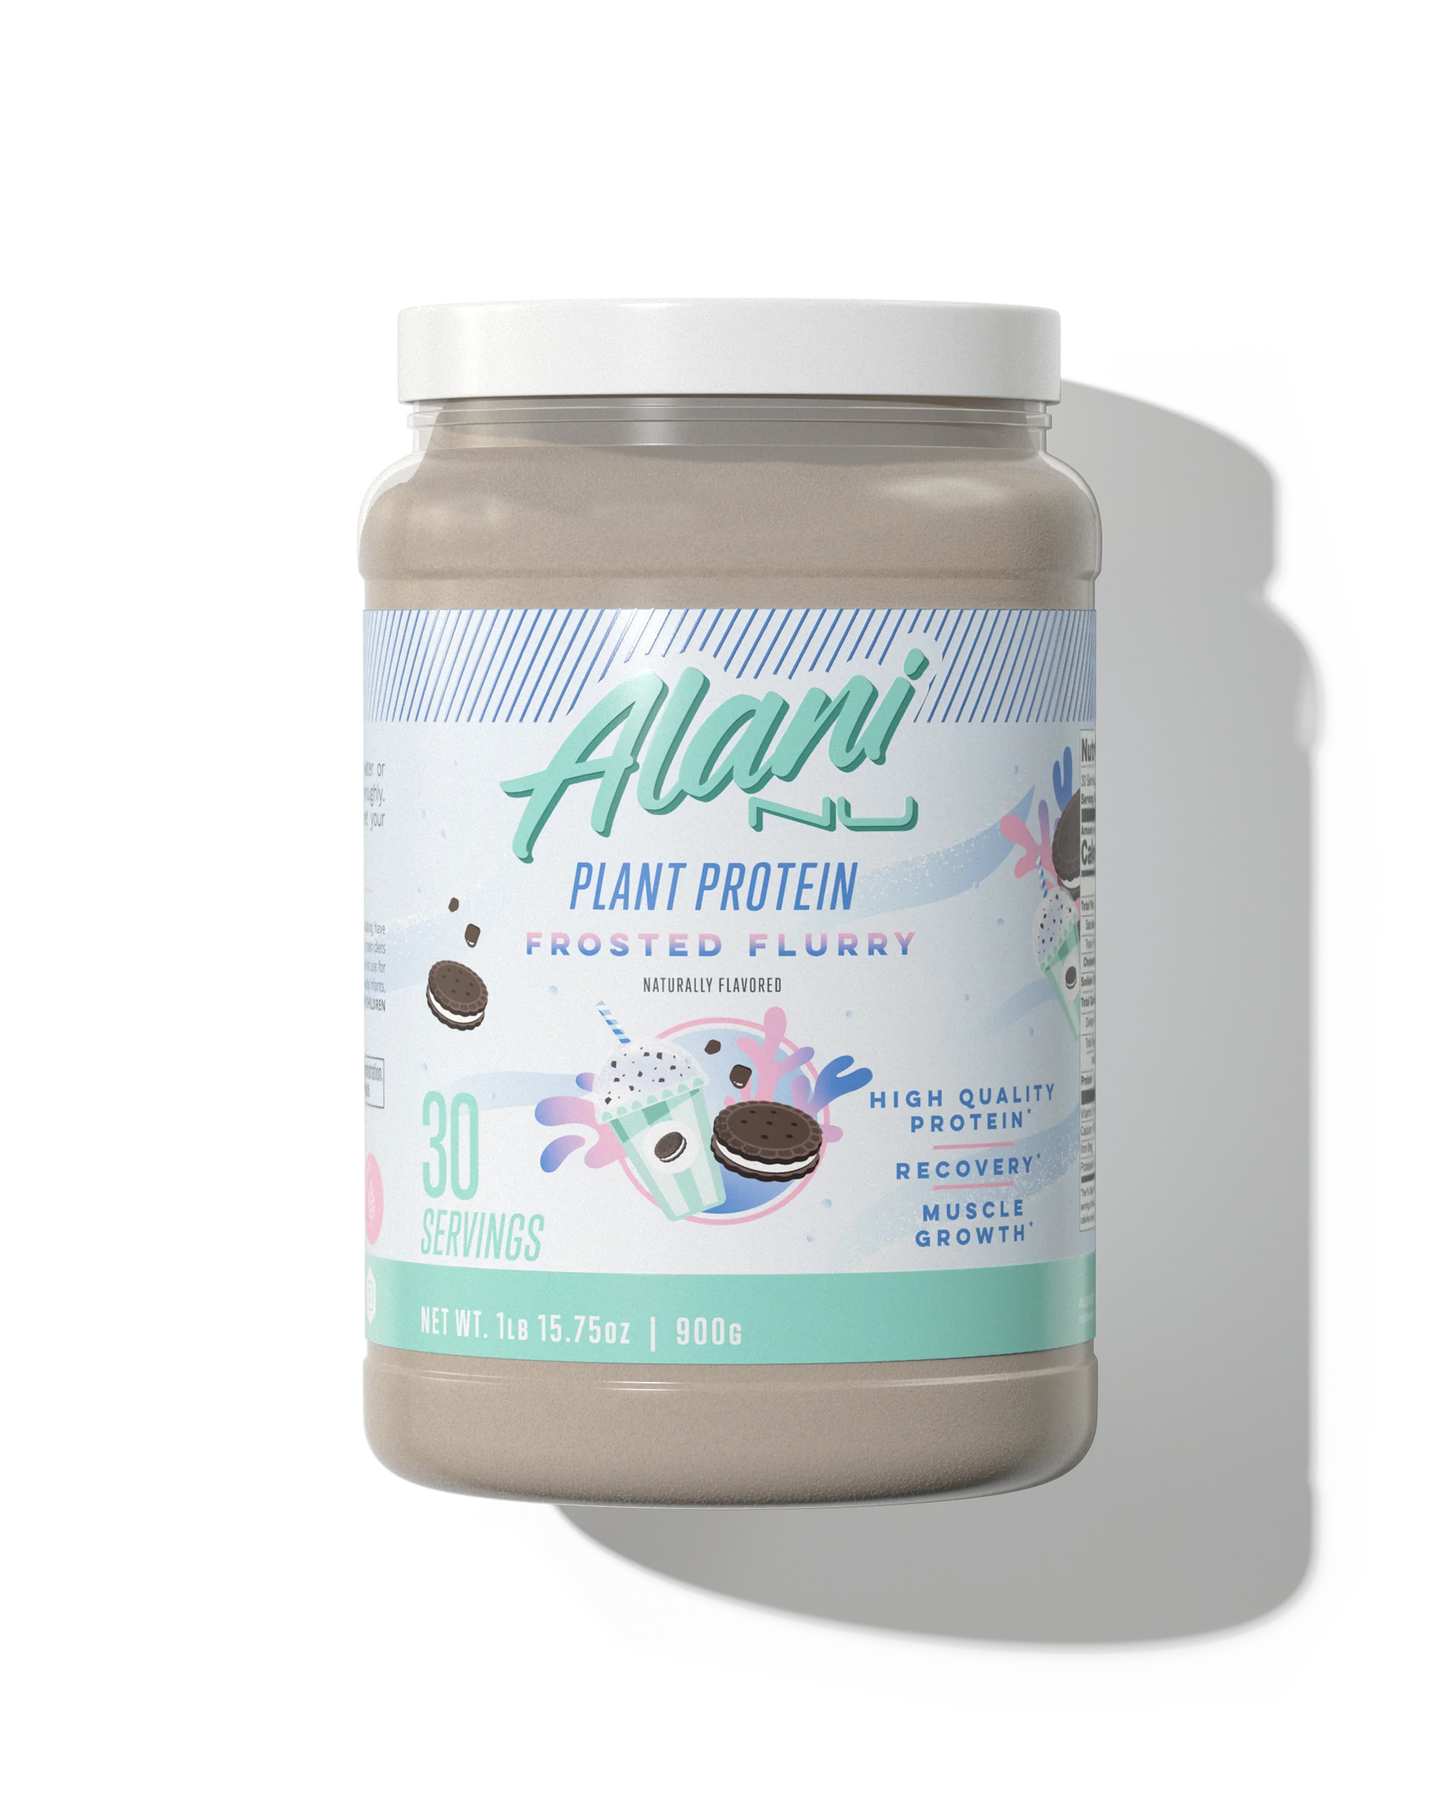 PLANT PROTEIN FROSTED FLURRY